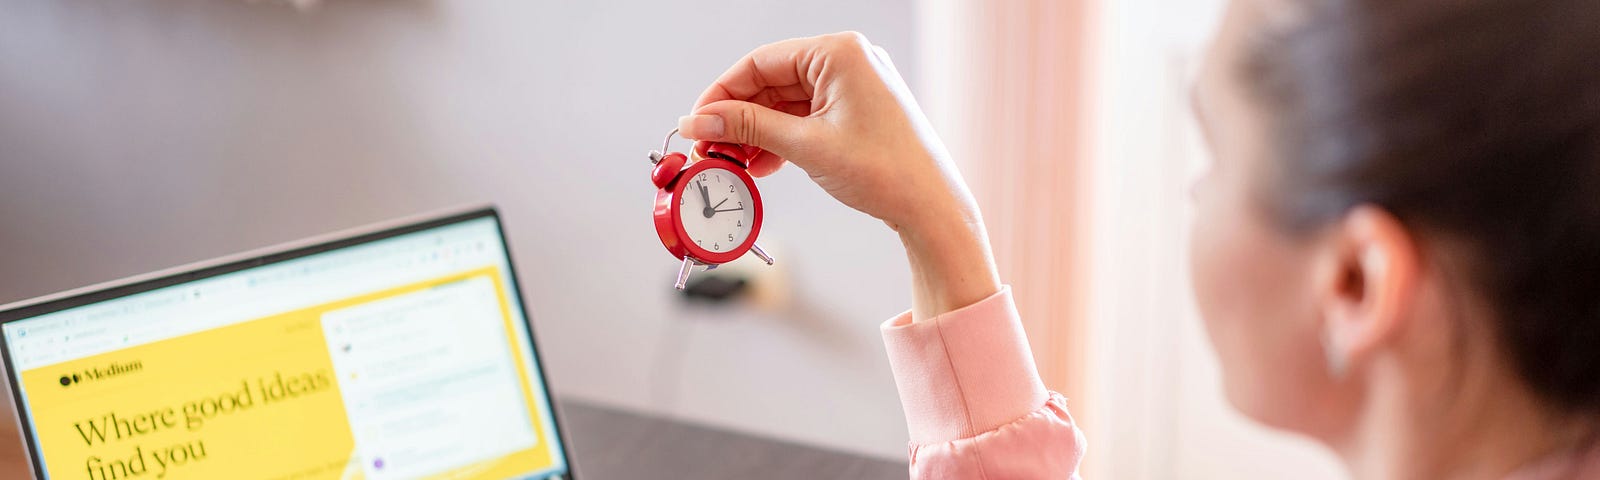 a woman at her laptop examines an alarm clock